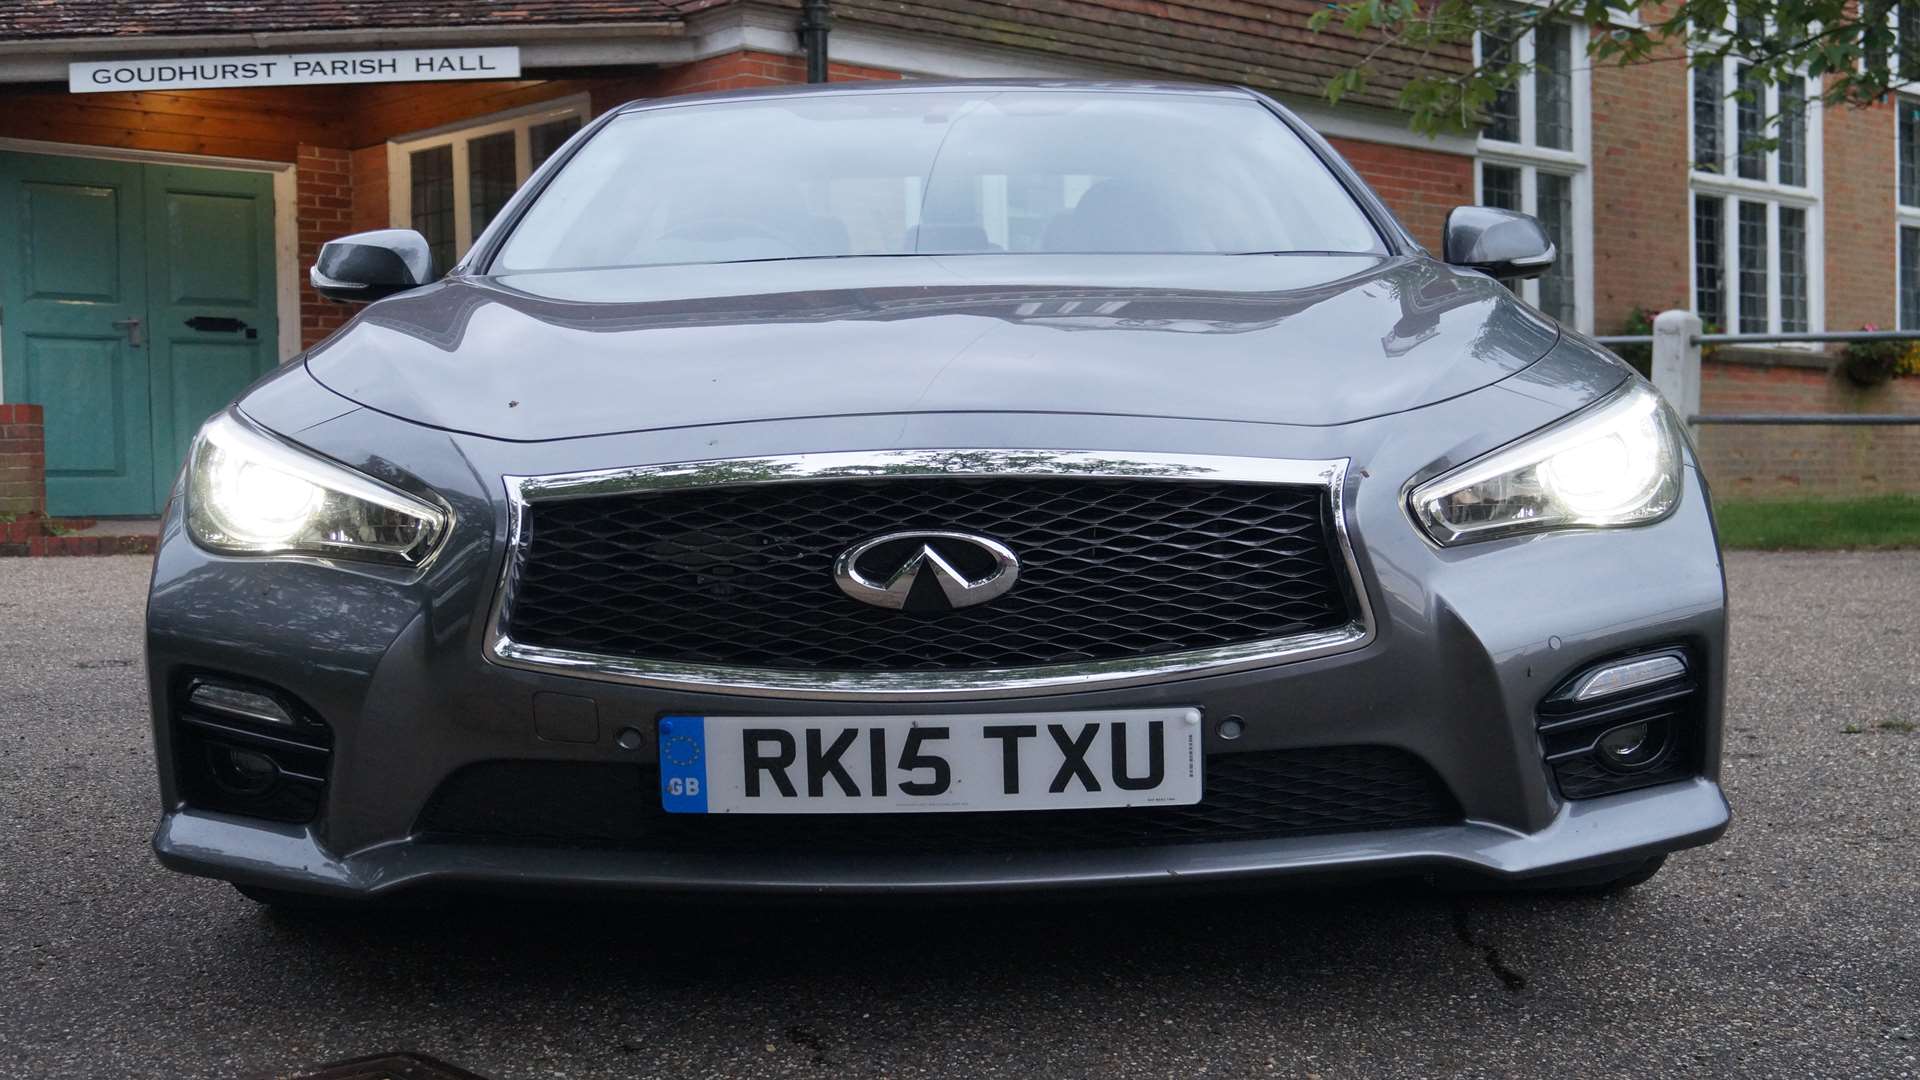 In a market dominated by the Germans, the Infiniti is a breath of fresh air